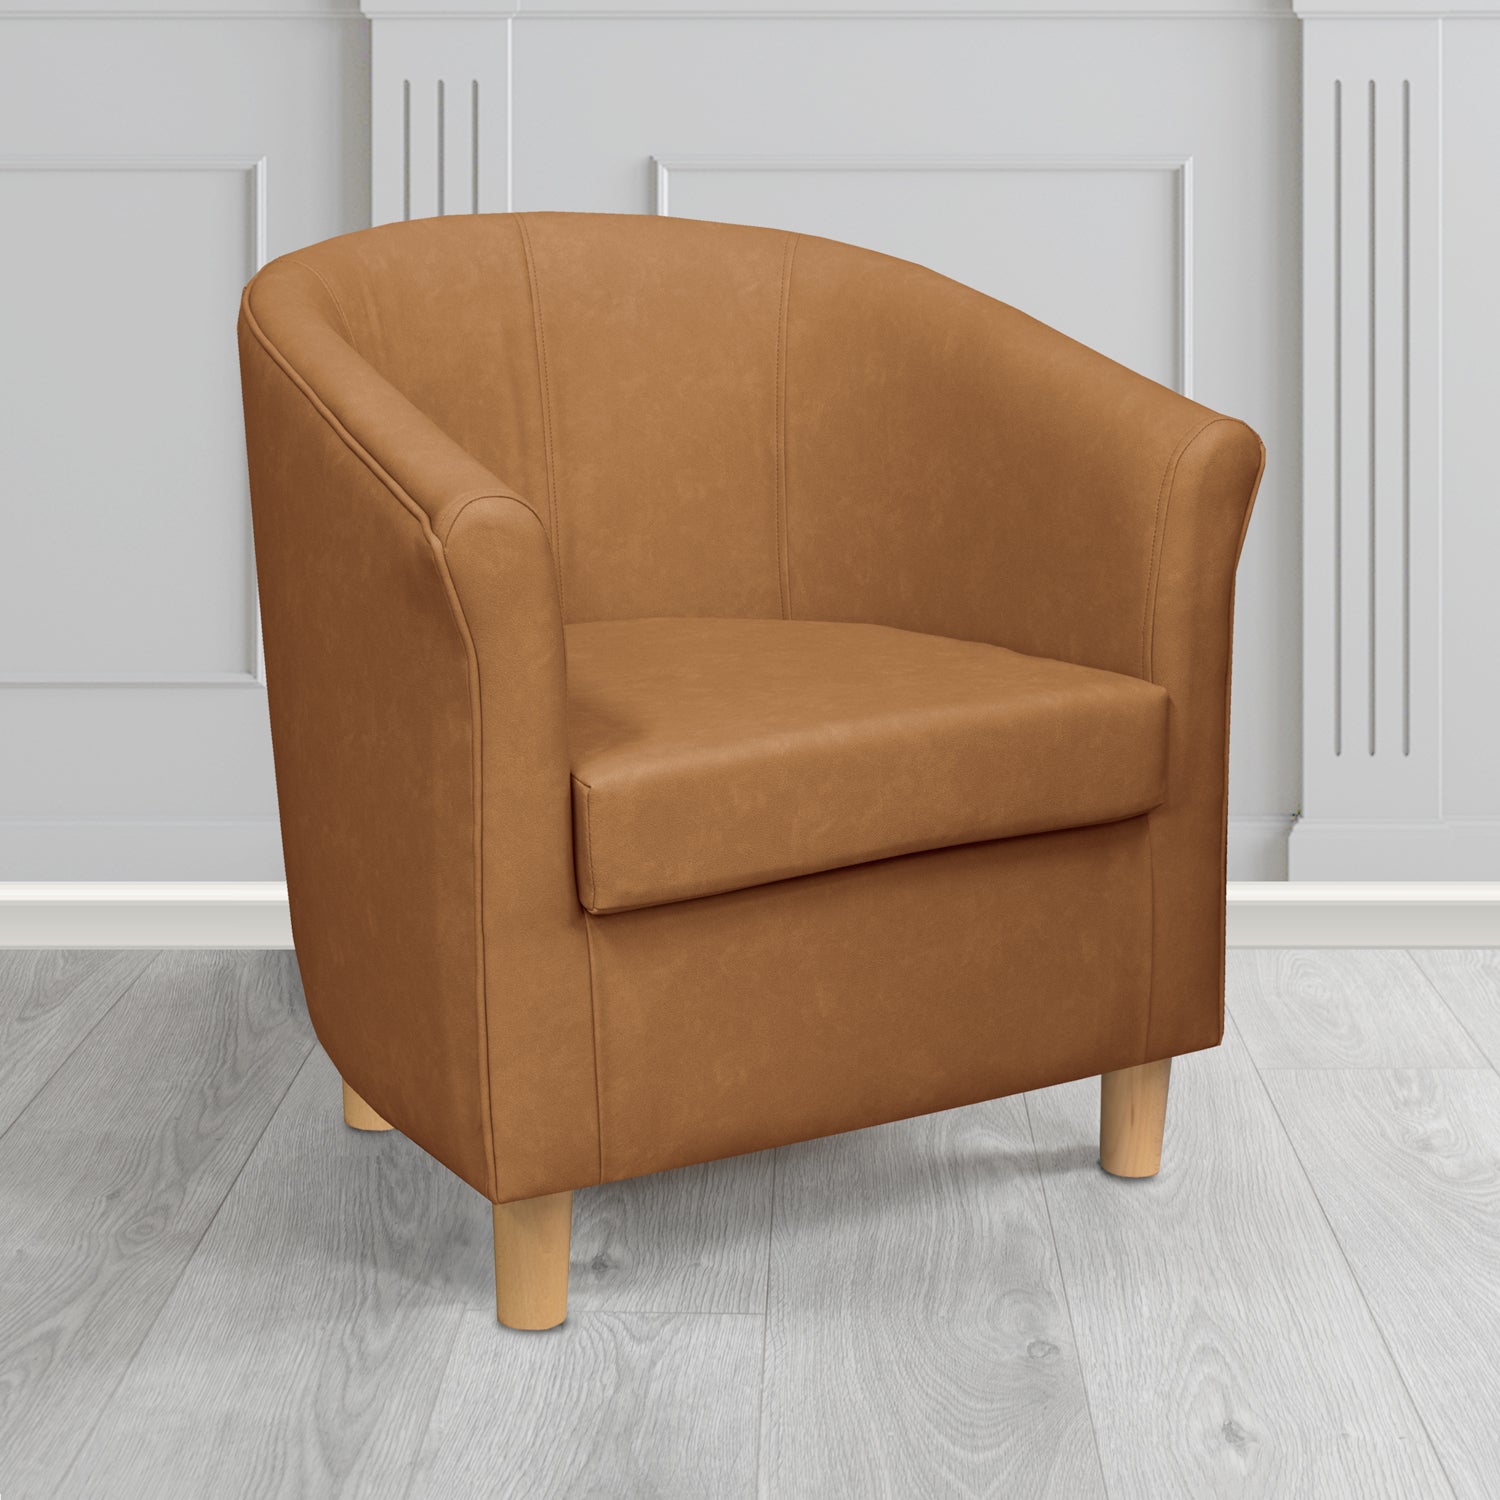 Tuscany Tub Chair in Infiniti Camel INF1849 Antimicrobial Crib 5 Faux Leather - The Tub Chair Shop